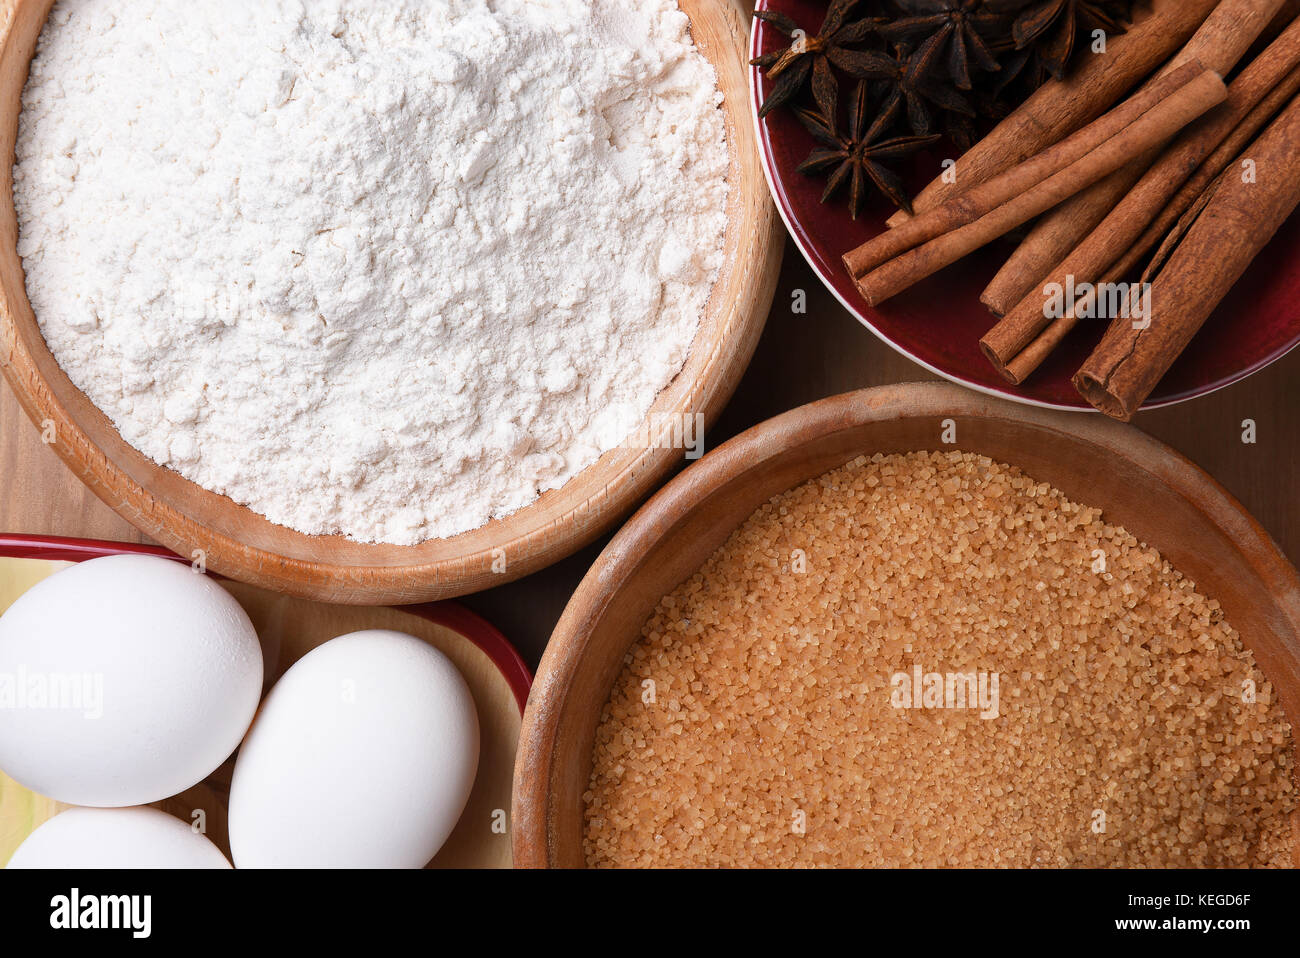 Holiday Baking: Still Life closeup of bowls full of sugar, flour, eggs, cinnamon and star anise in preparation for making holiday treats. Stock Photo